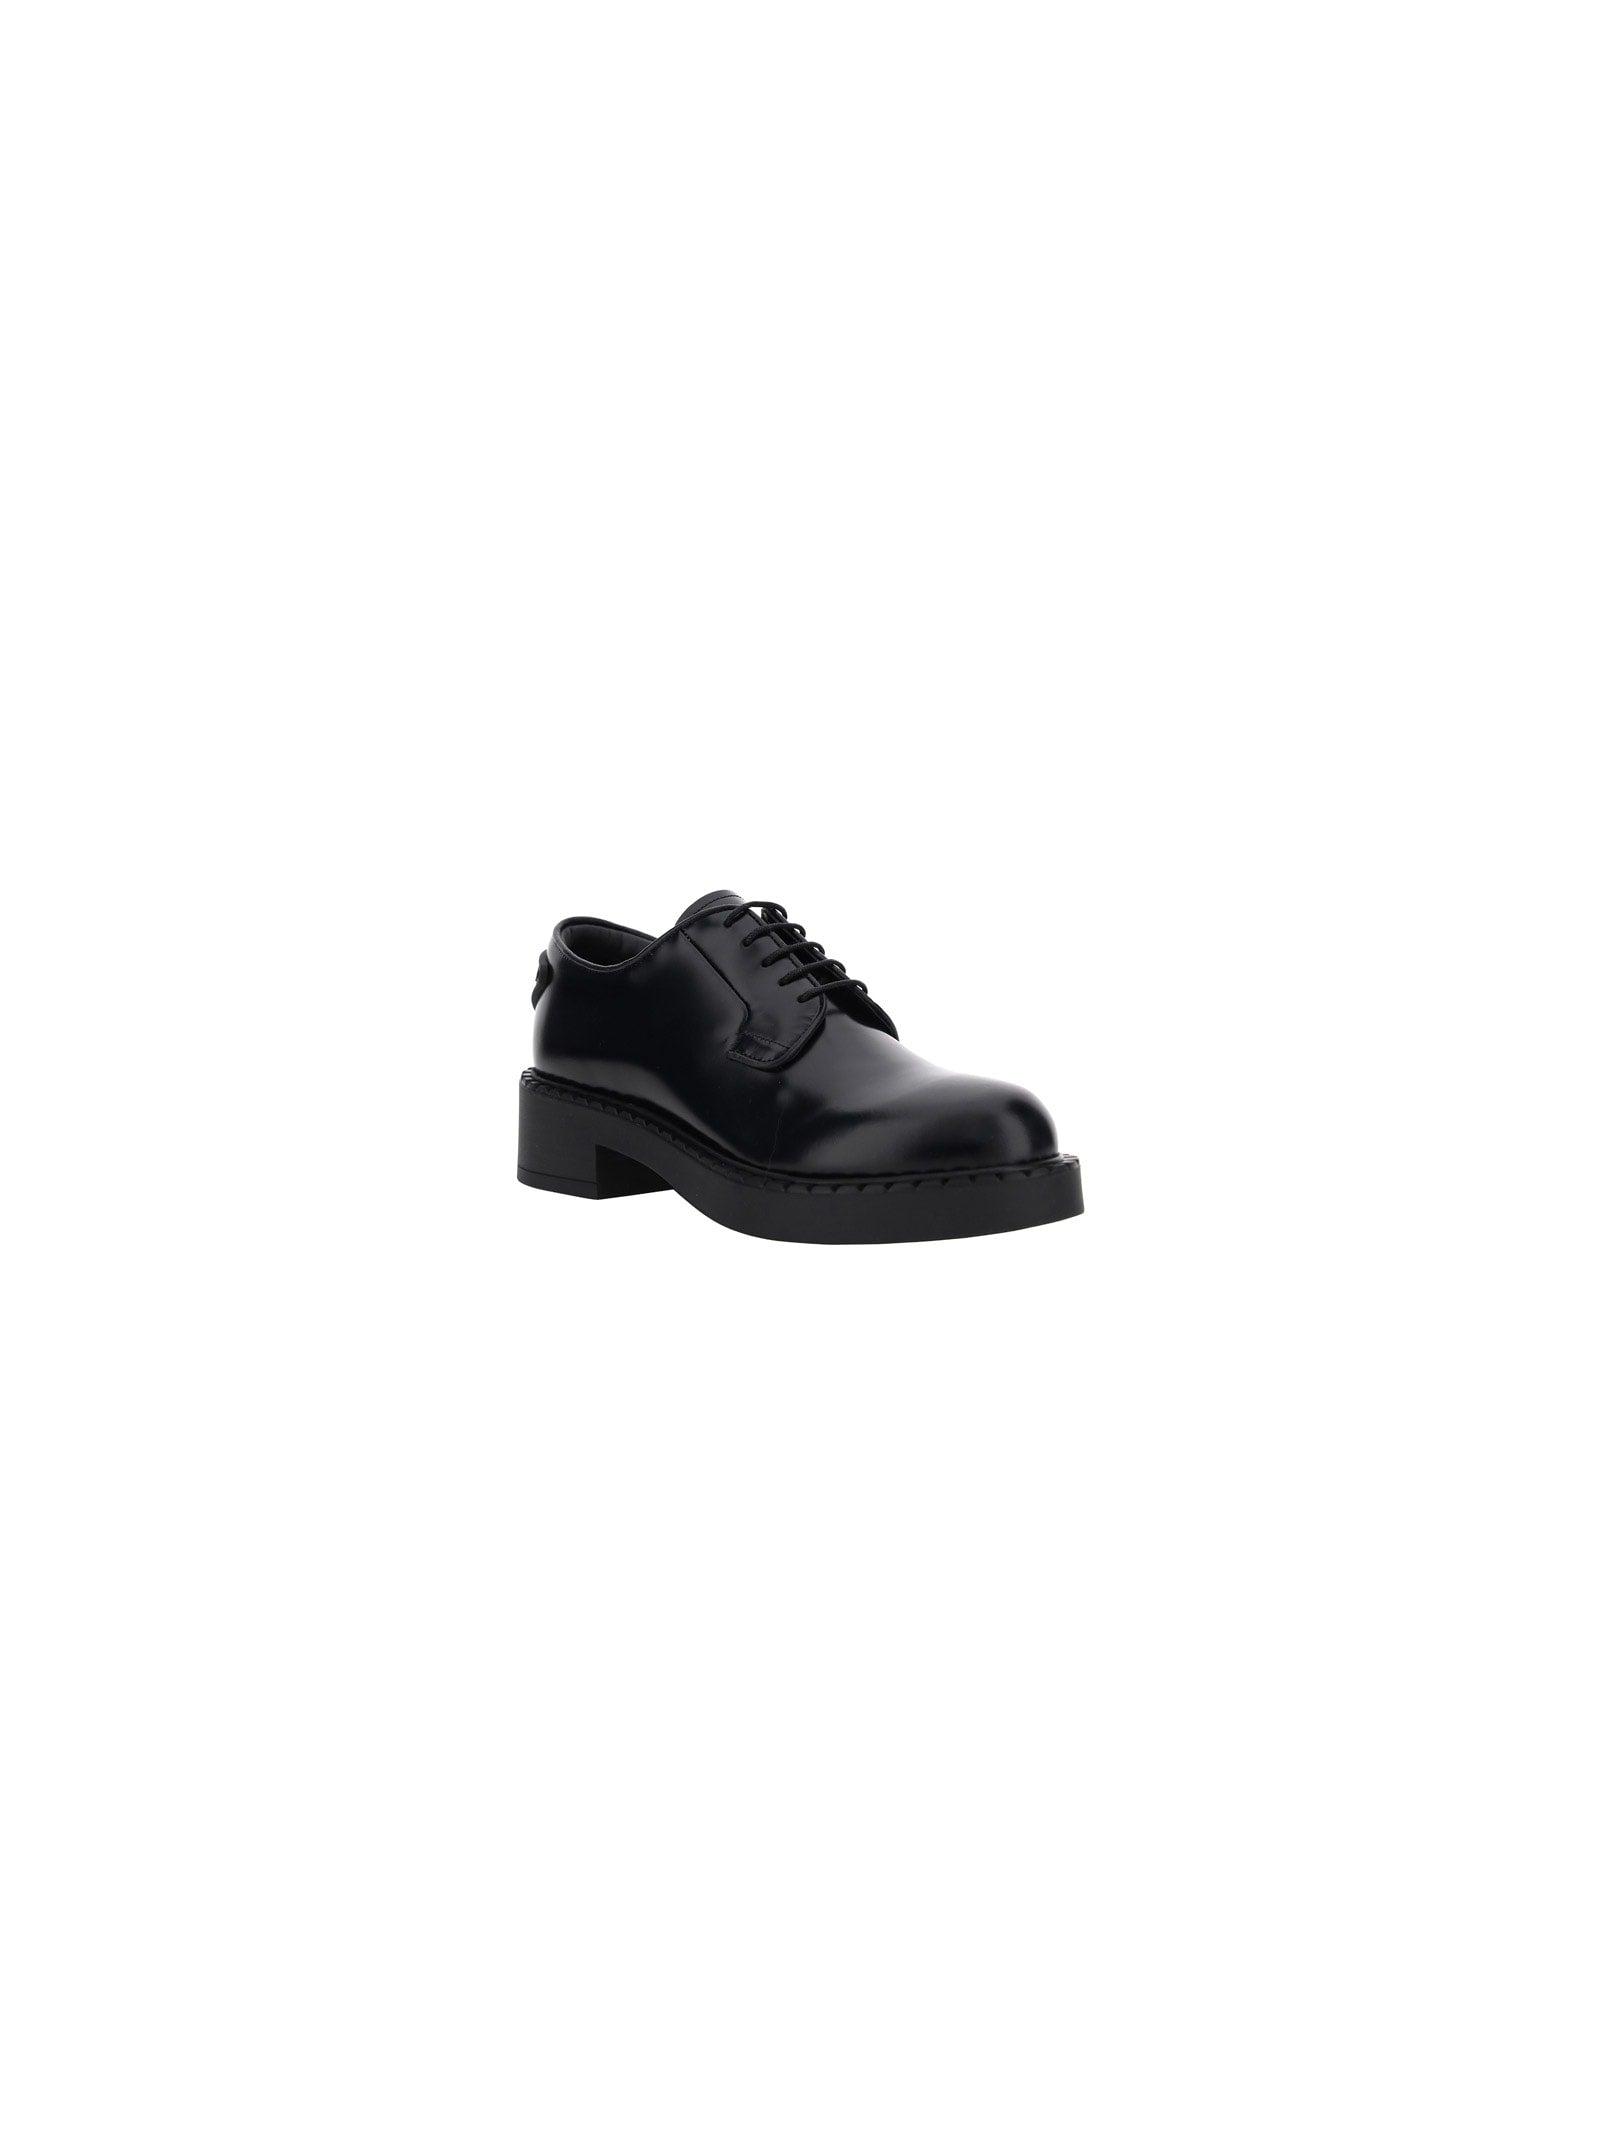 Prada Leather Lace-up Shoes - Women in Nero (Black) - Save 54% | Lyst